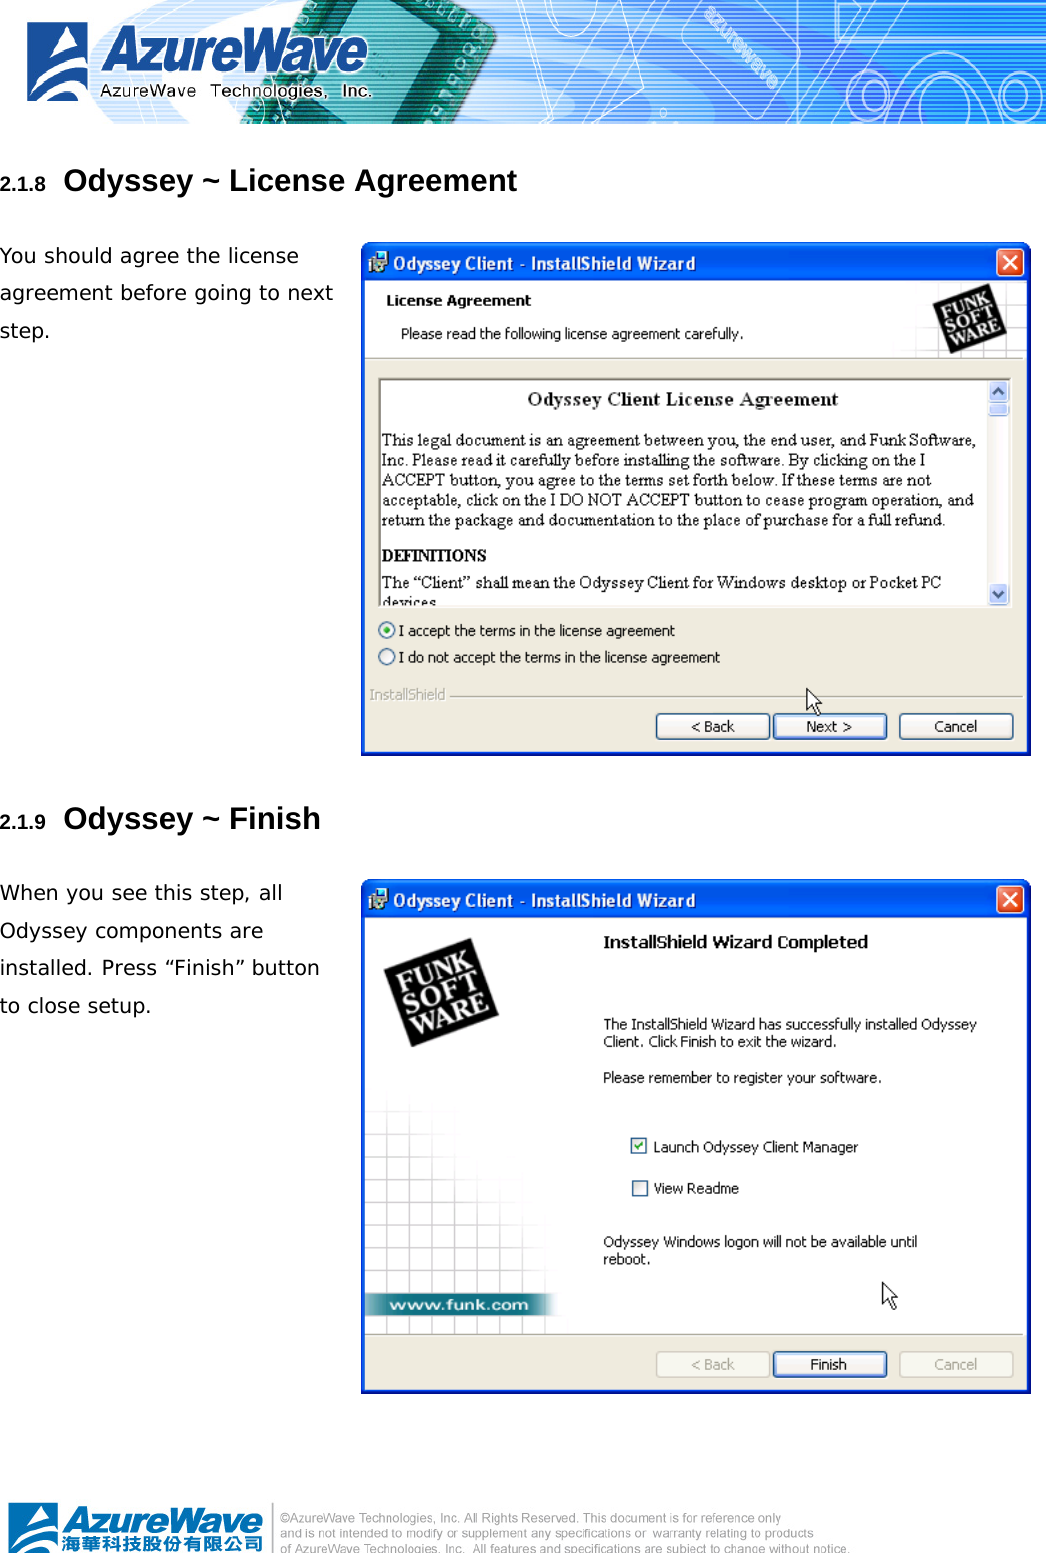   2.1.8   Odyssey ~ License Agreement   You should agree the license agreement before going to next step.  2.1.9   Odyssey ~ Finish When you see this step, all Odyssey components are installed. Press “Finish” button to close setup.   